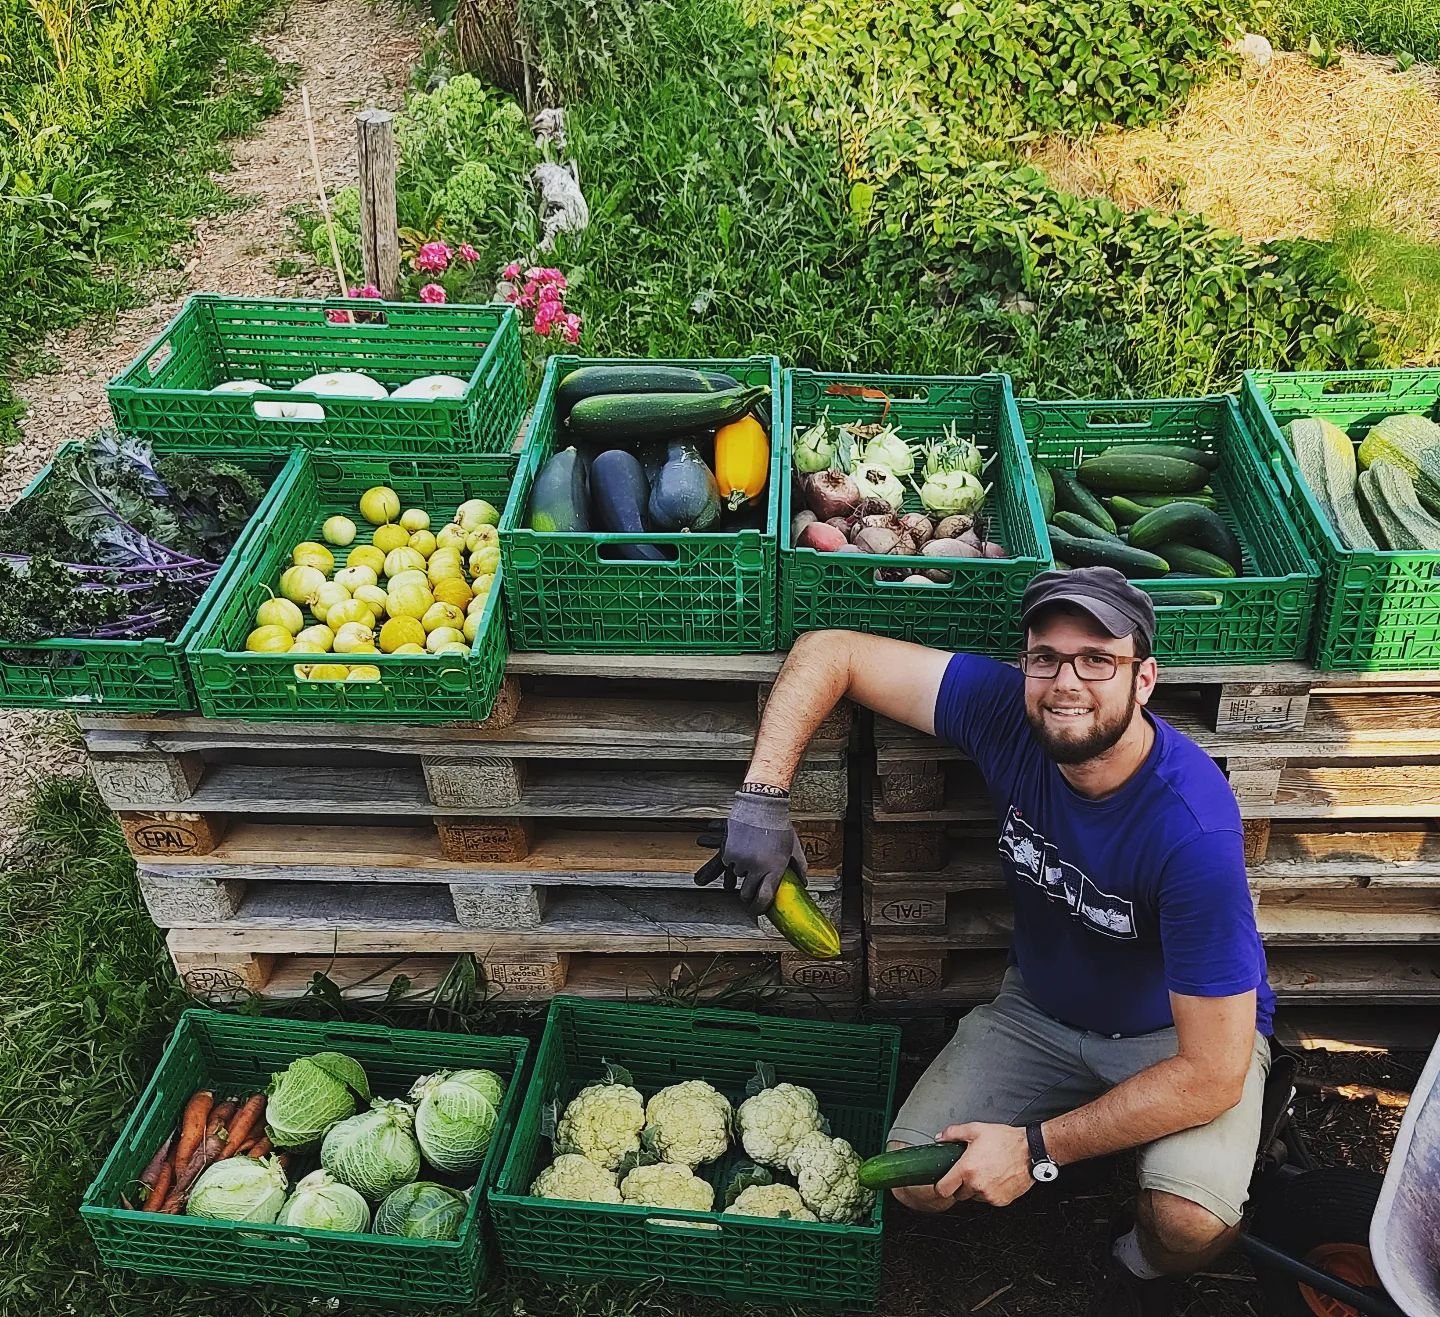 Great to supply our friend Max @himmelamberg with some extra produce. Now he can work his magic on it and preserve the summer energy for months to come. Check out his online shop at https://himmel-am-berg.ch
#permaculturegarden
#vegetablecollaboratio